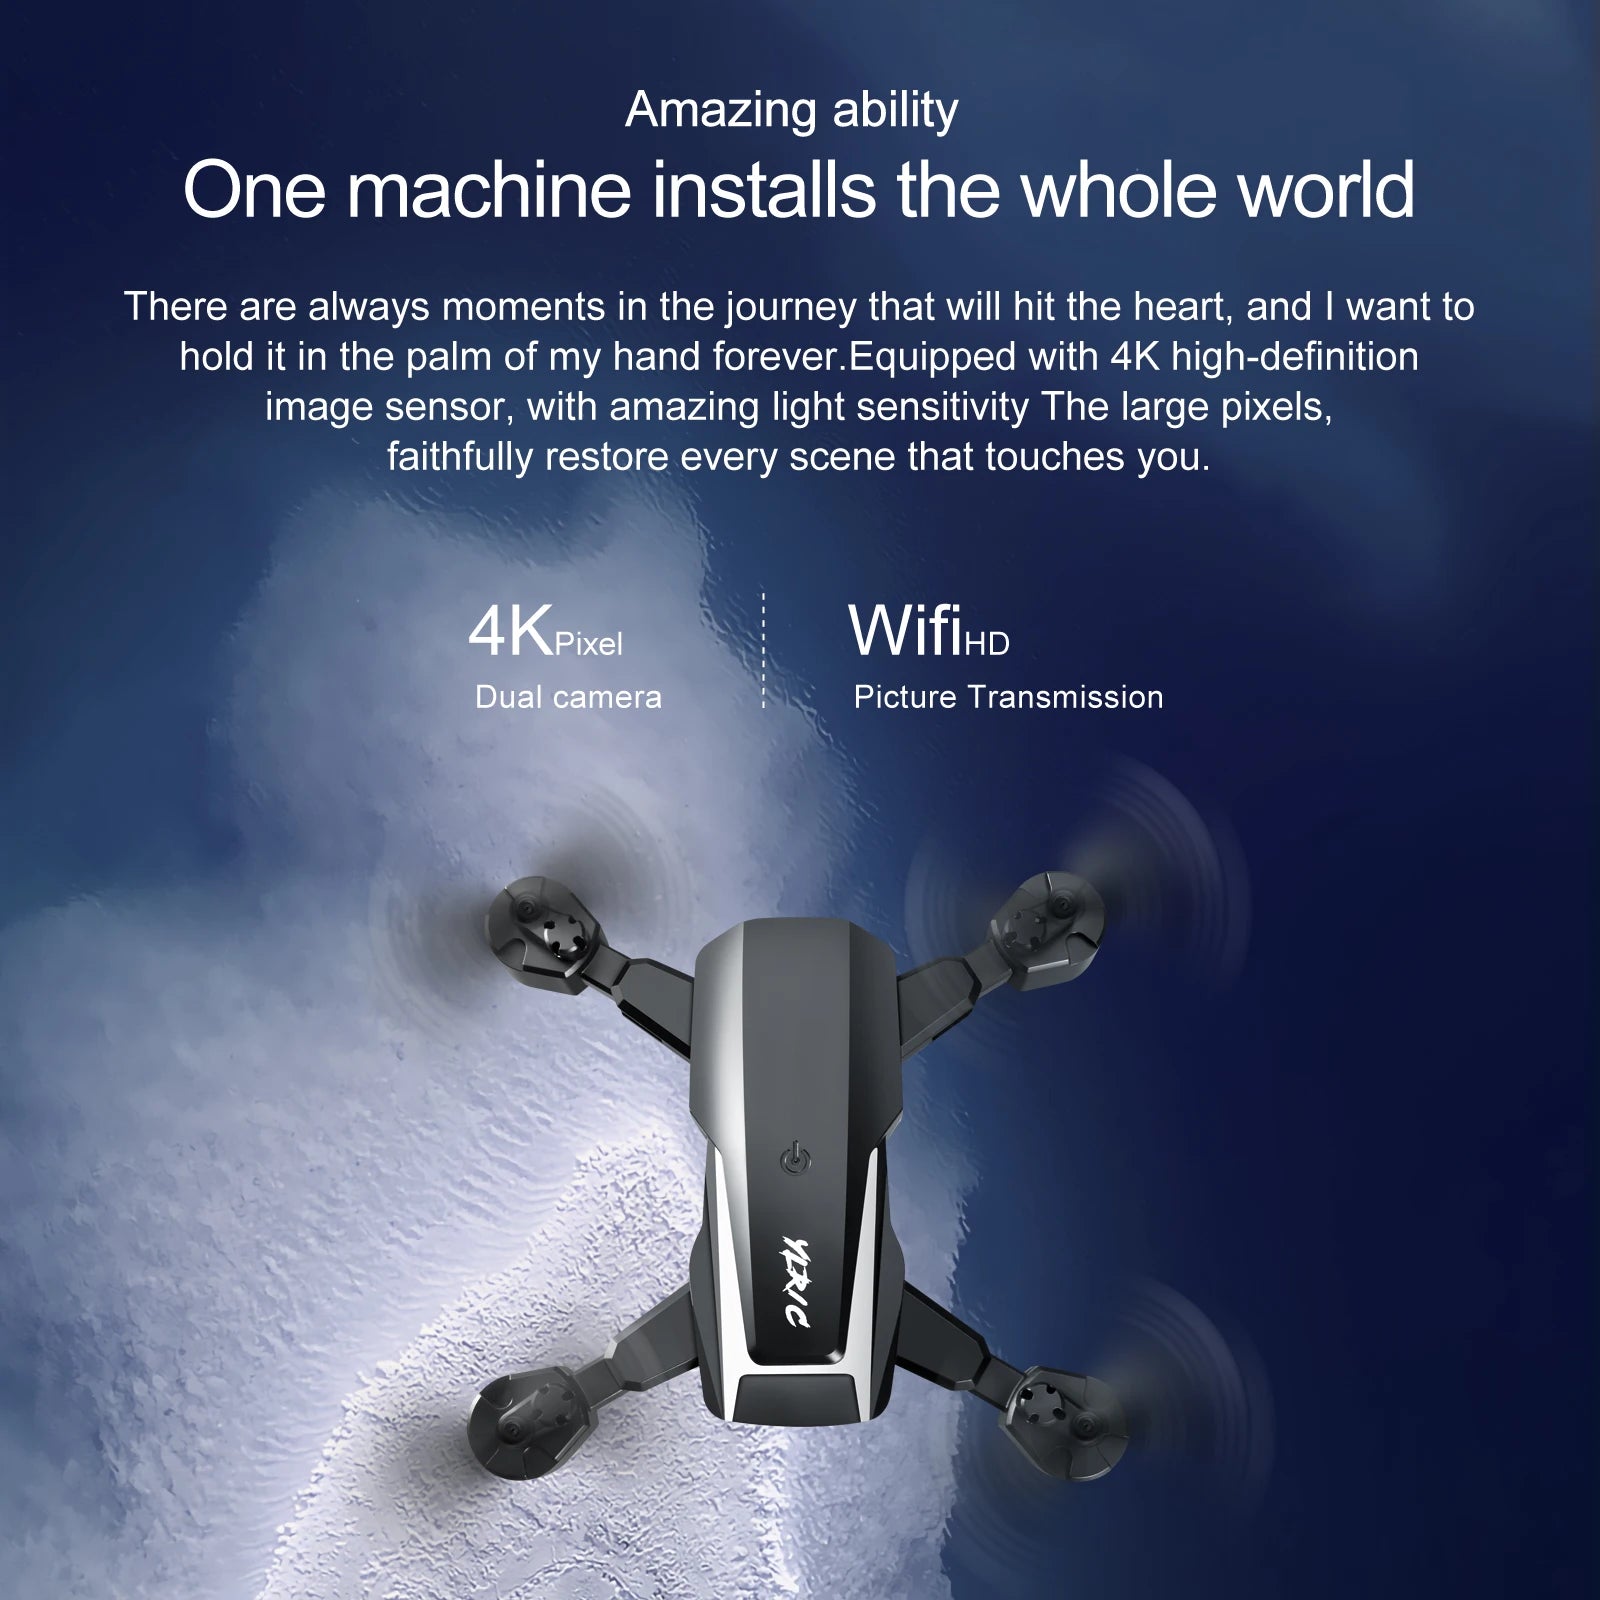 S90 Mini Drone, amazing ability one machine installs the whole world there are always moments in